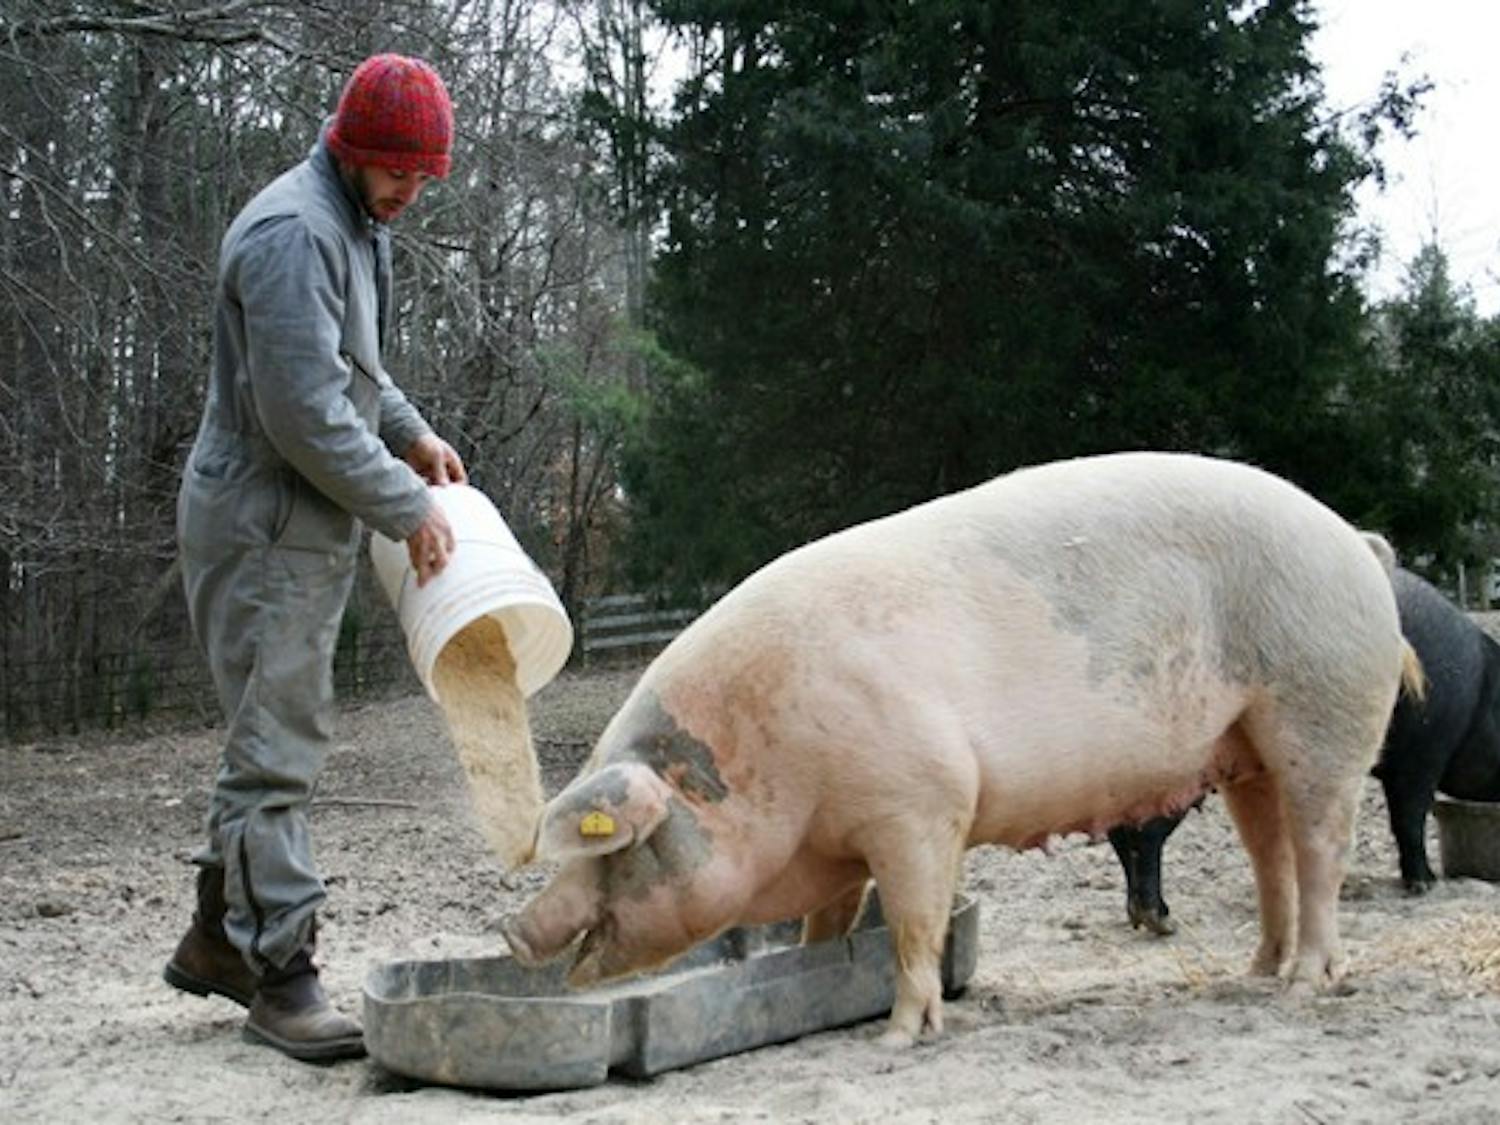 Will Soehner feeds the sows Tuesday morning in Chapel Hill on Eco Farm. DTH/Anika Anand